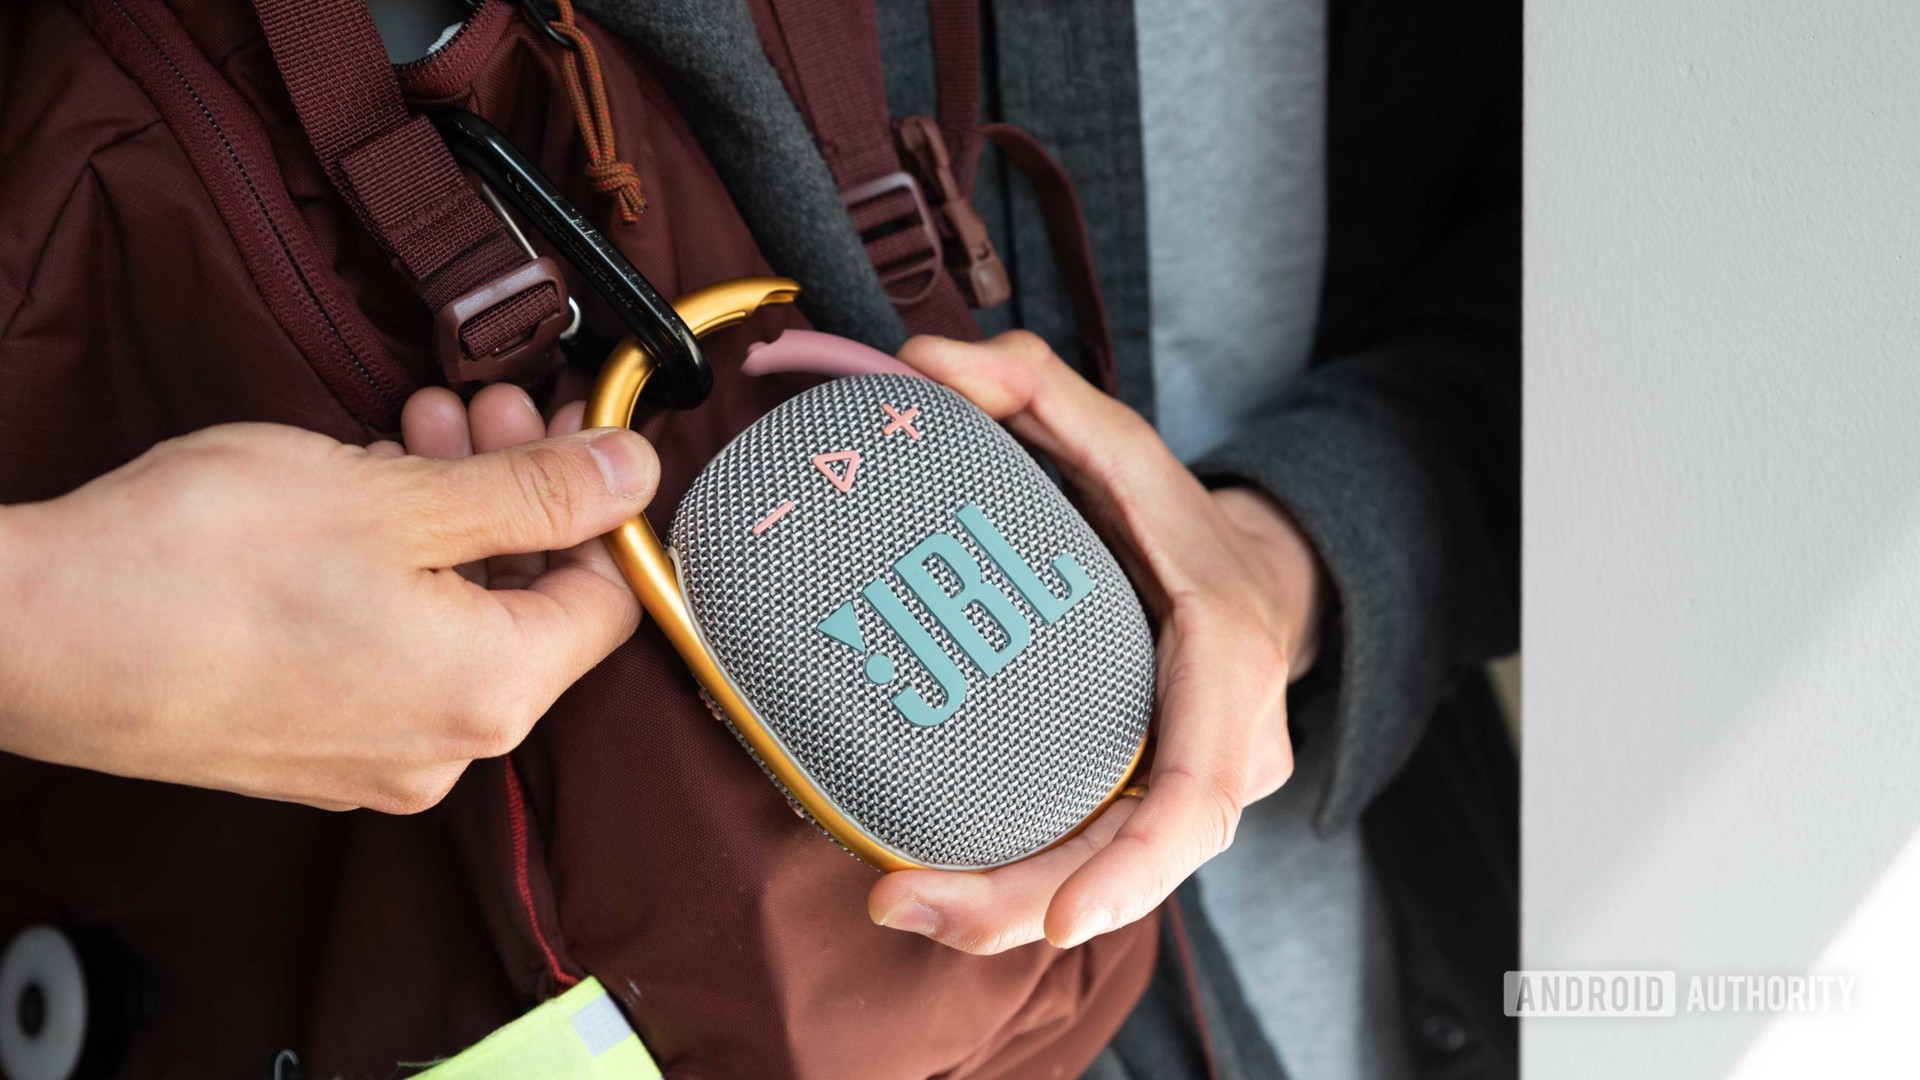 Two hands attach the JBL Clip 4 Bluetooth speaker to a red backpack.